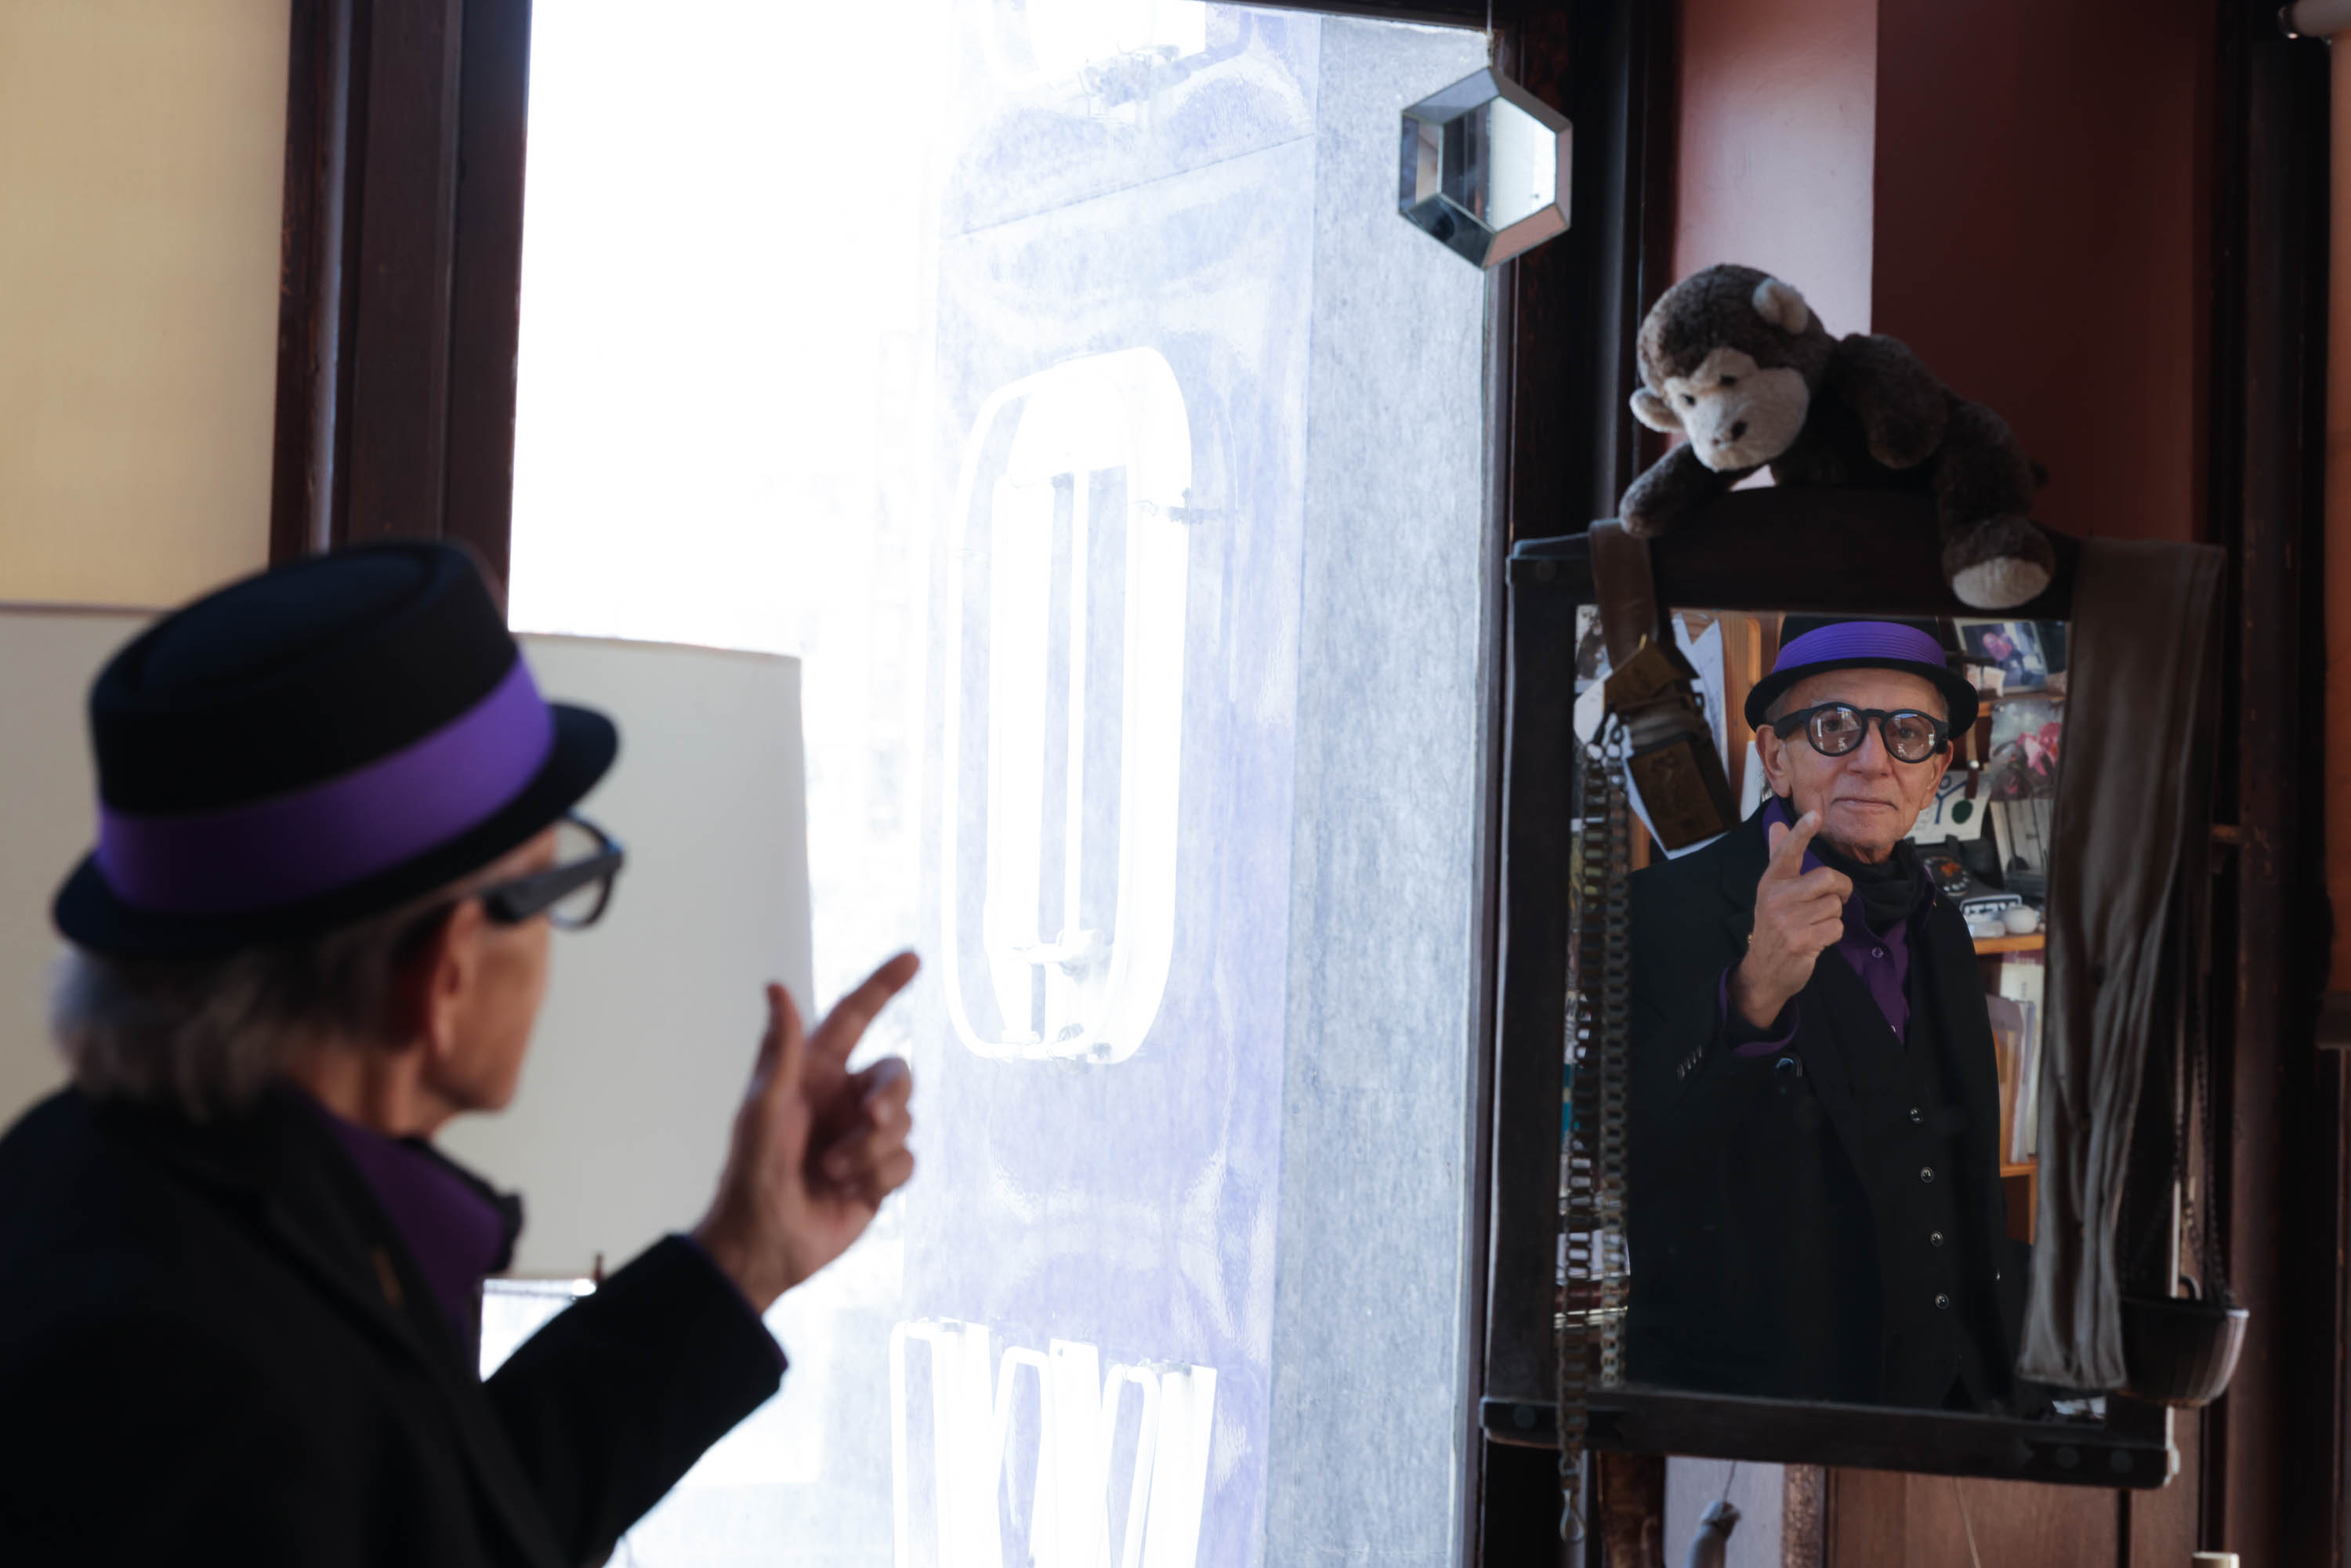 A person in a purple hat gestures, reflected in a mirror beside a plush monkey. Bright light shines from a window.